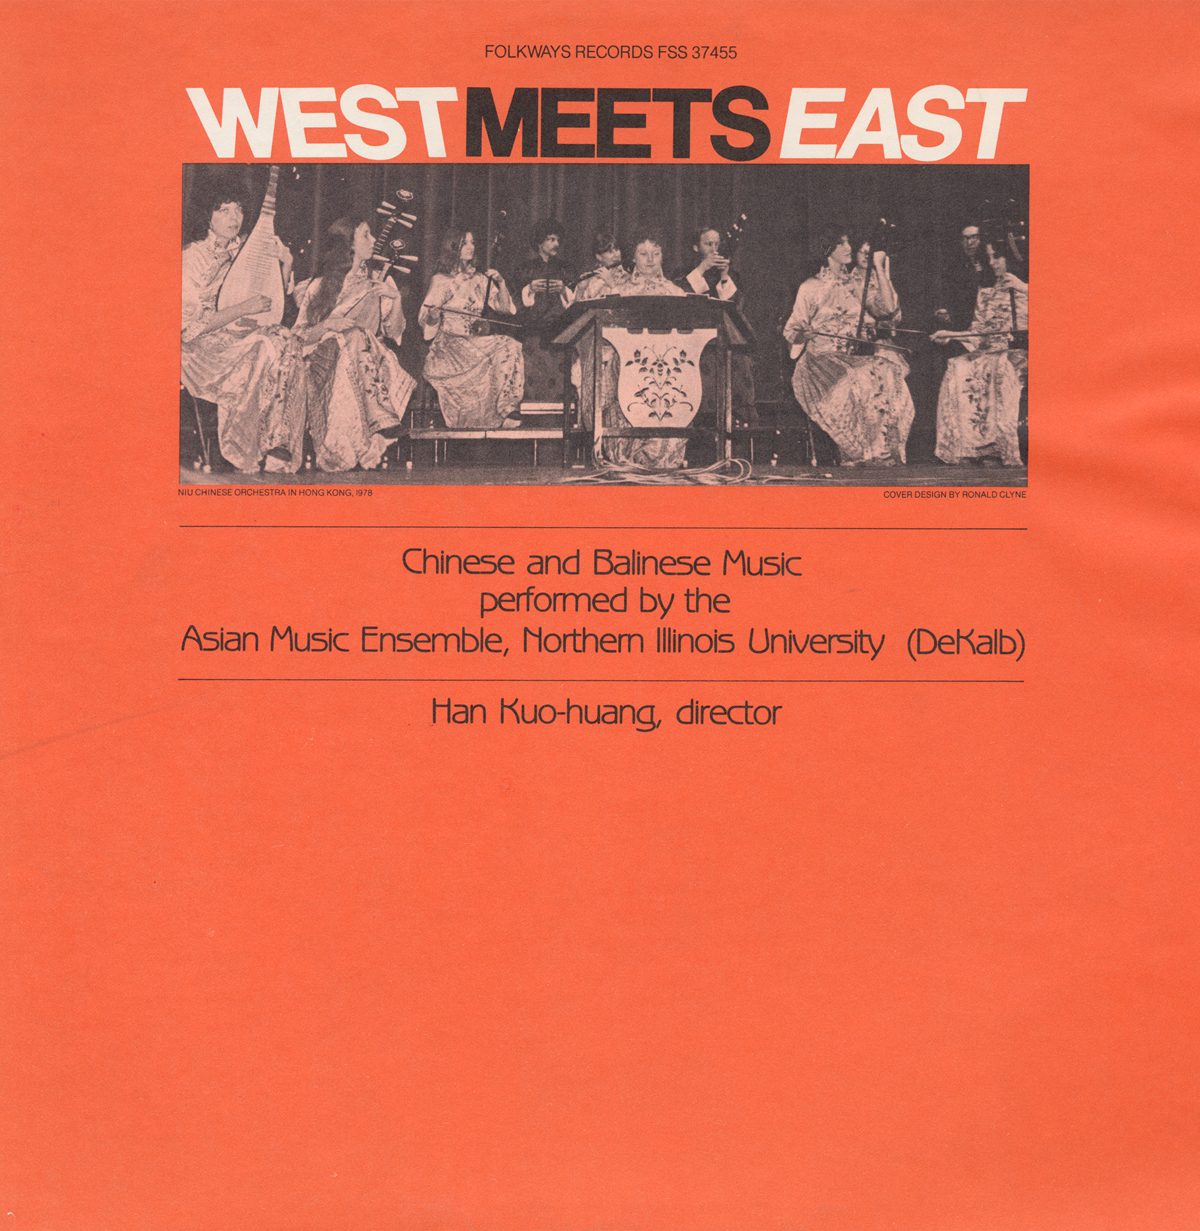 WEST MEETS EAST: CHINESE AND BALINESE MUSIC